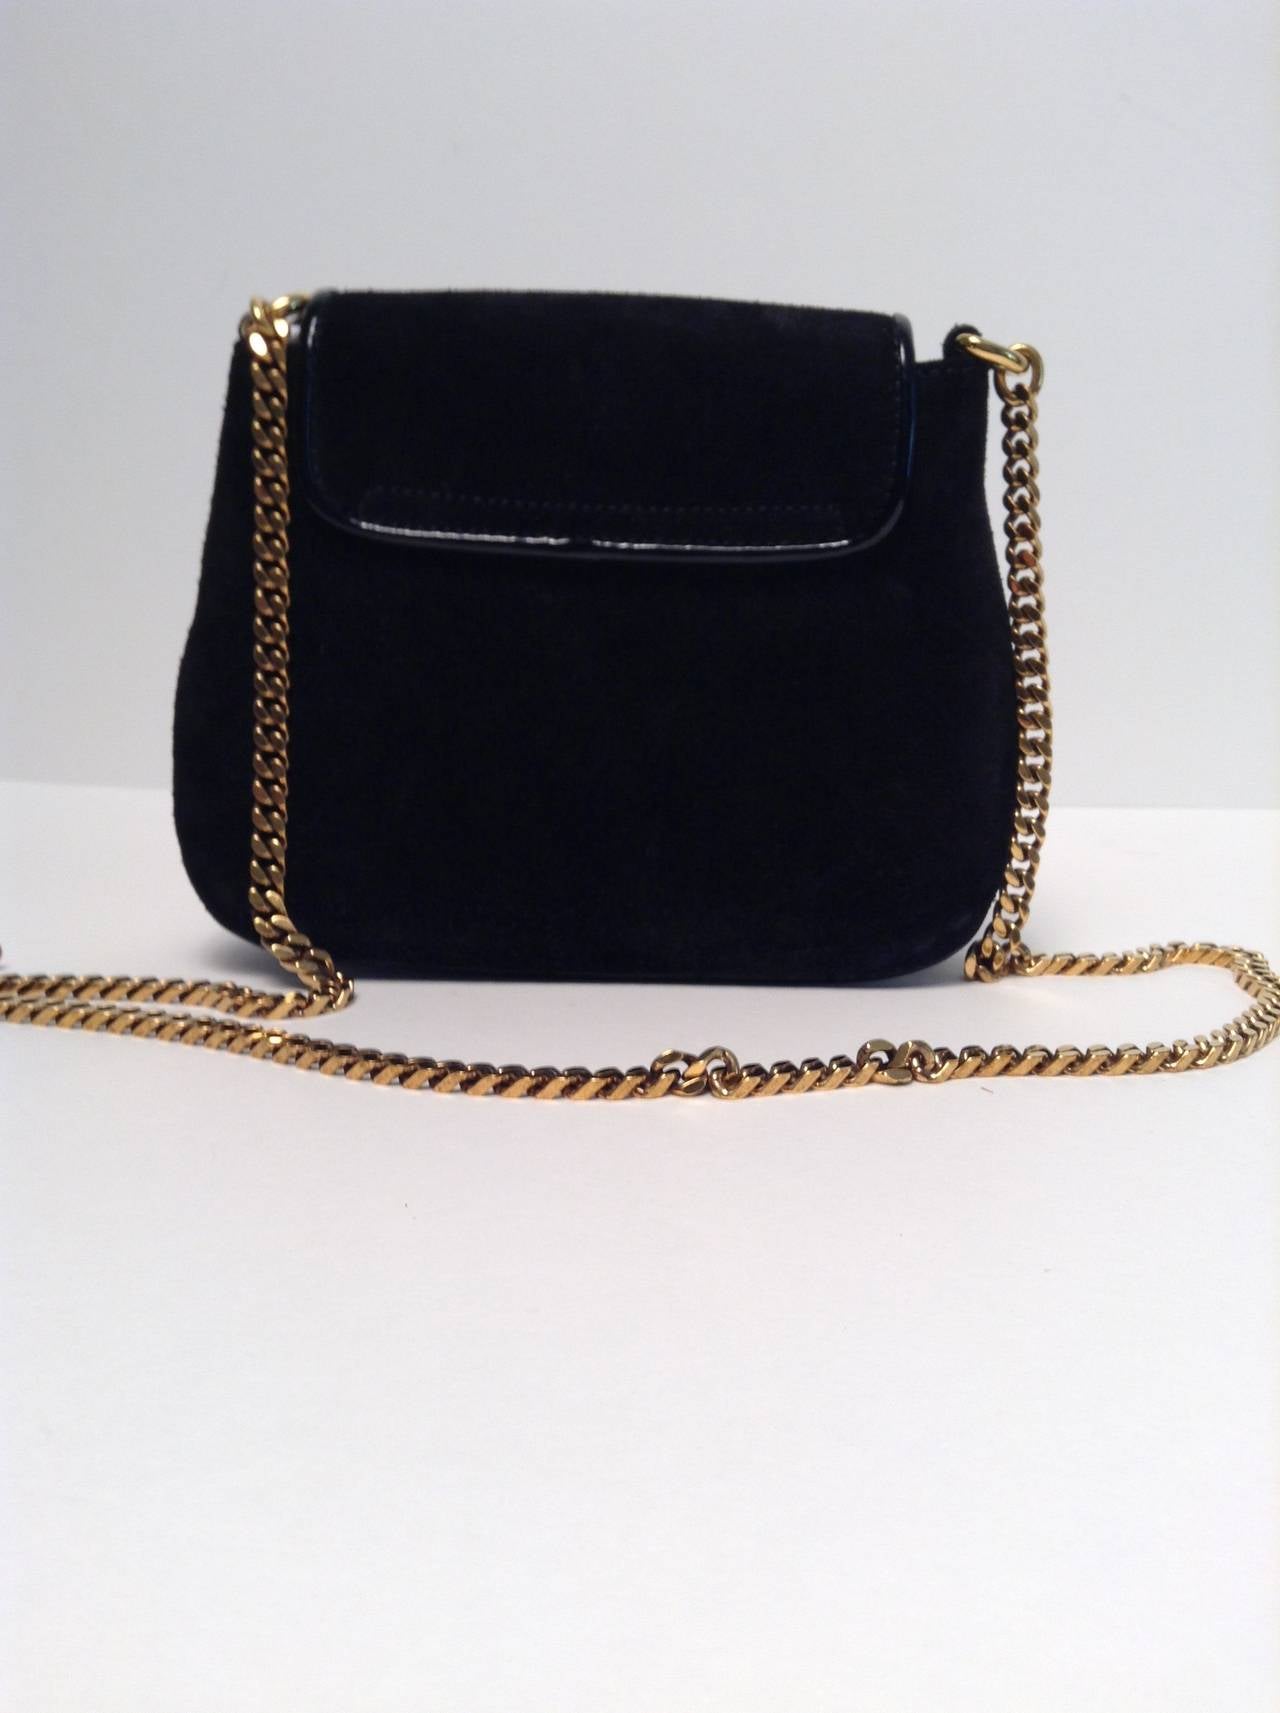 Gucci Black Suede Gold Chain Bag 1973 Reissue 4